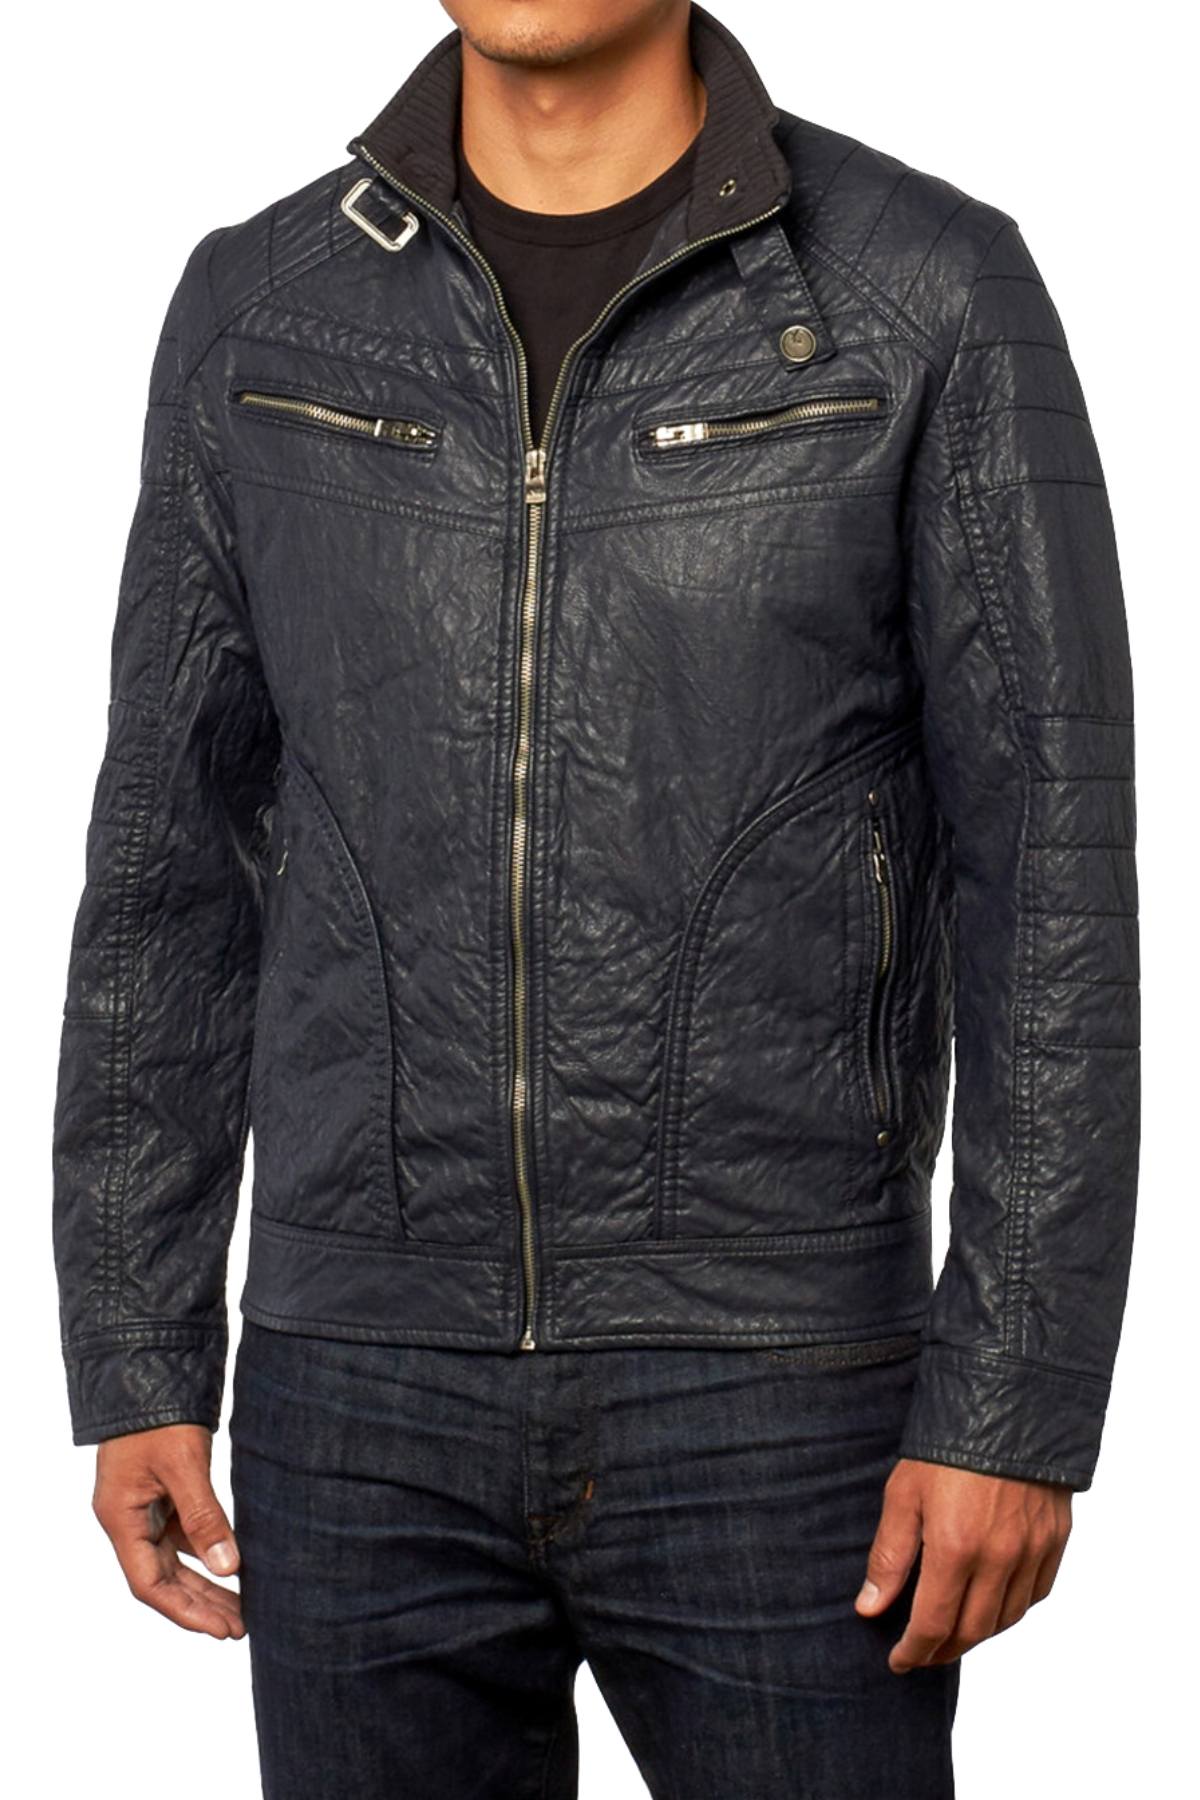 X-Ray Jeans Navy Distressed Faux-Leather Zip-Up Jacket